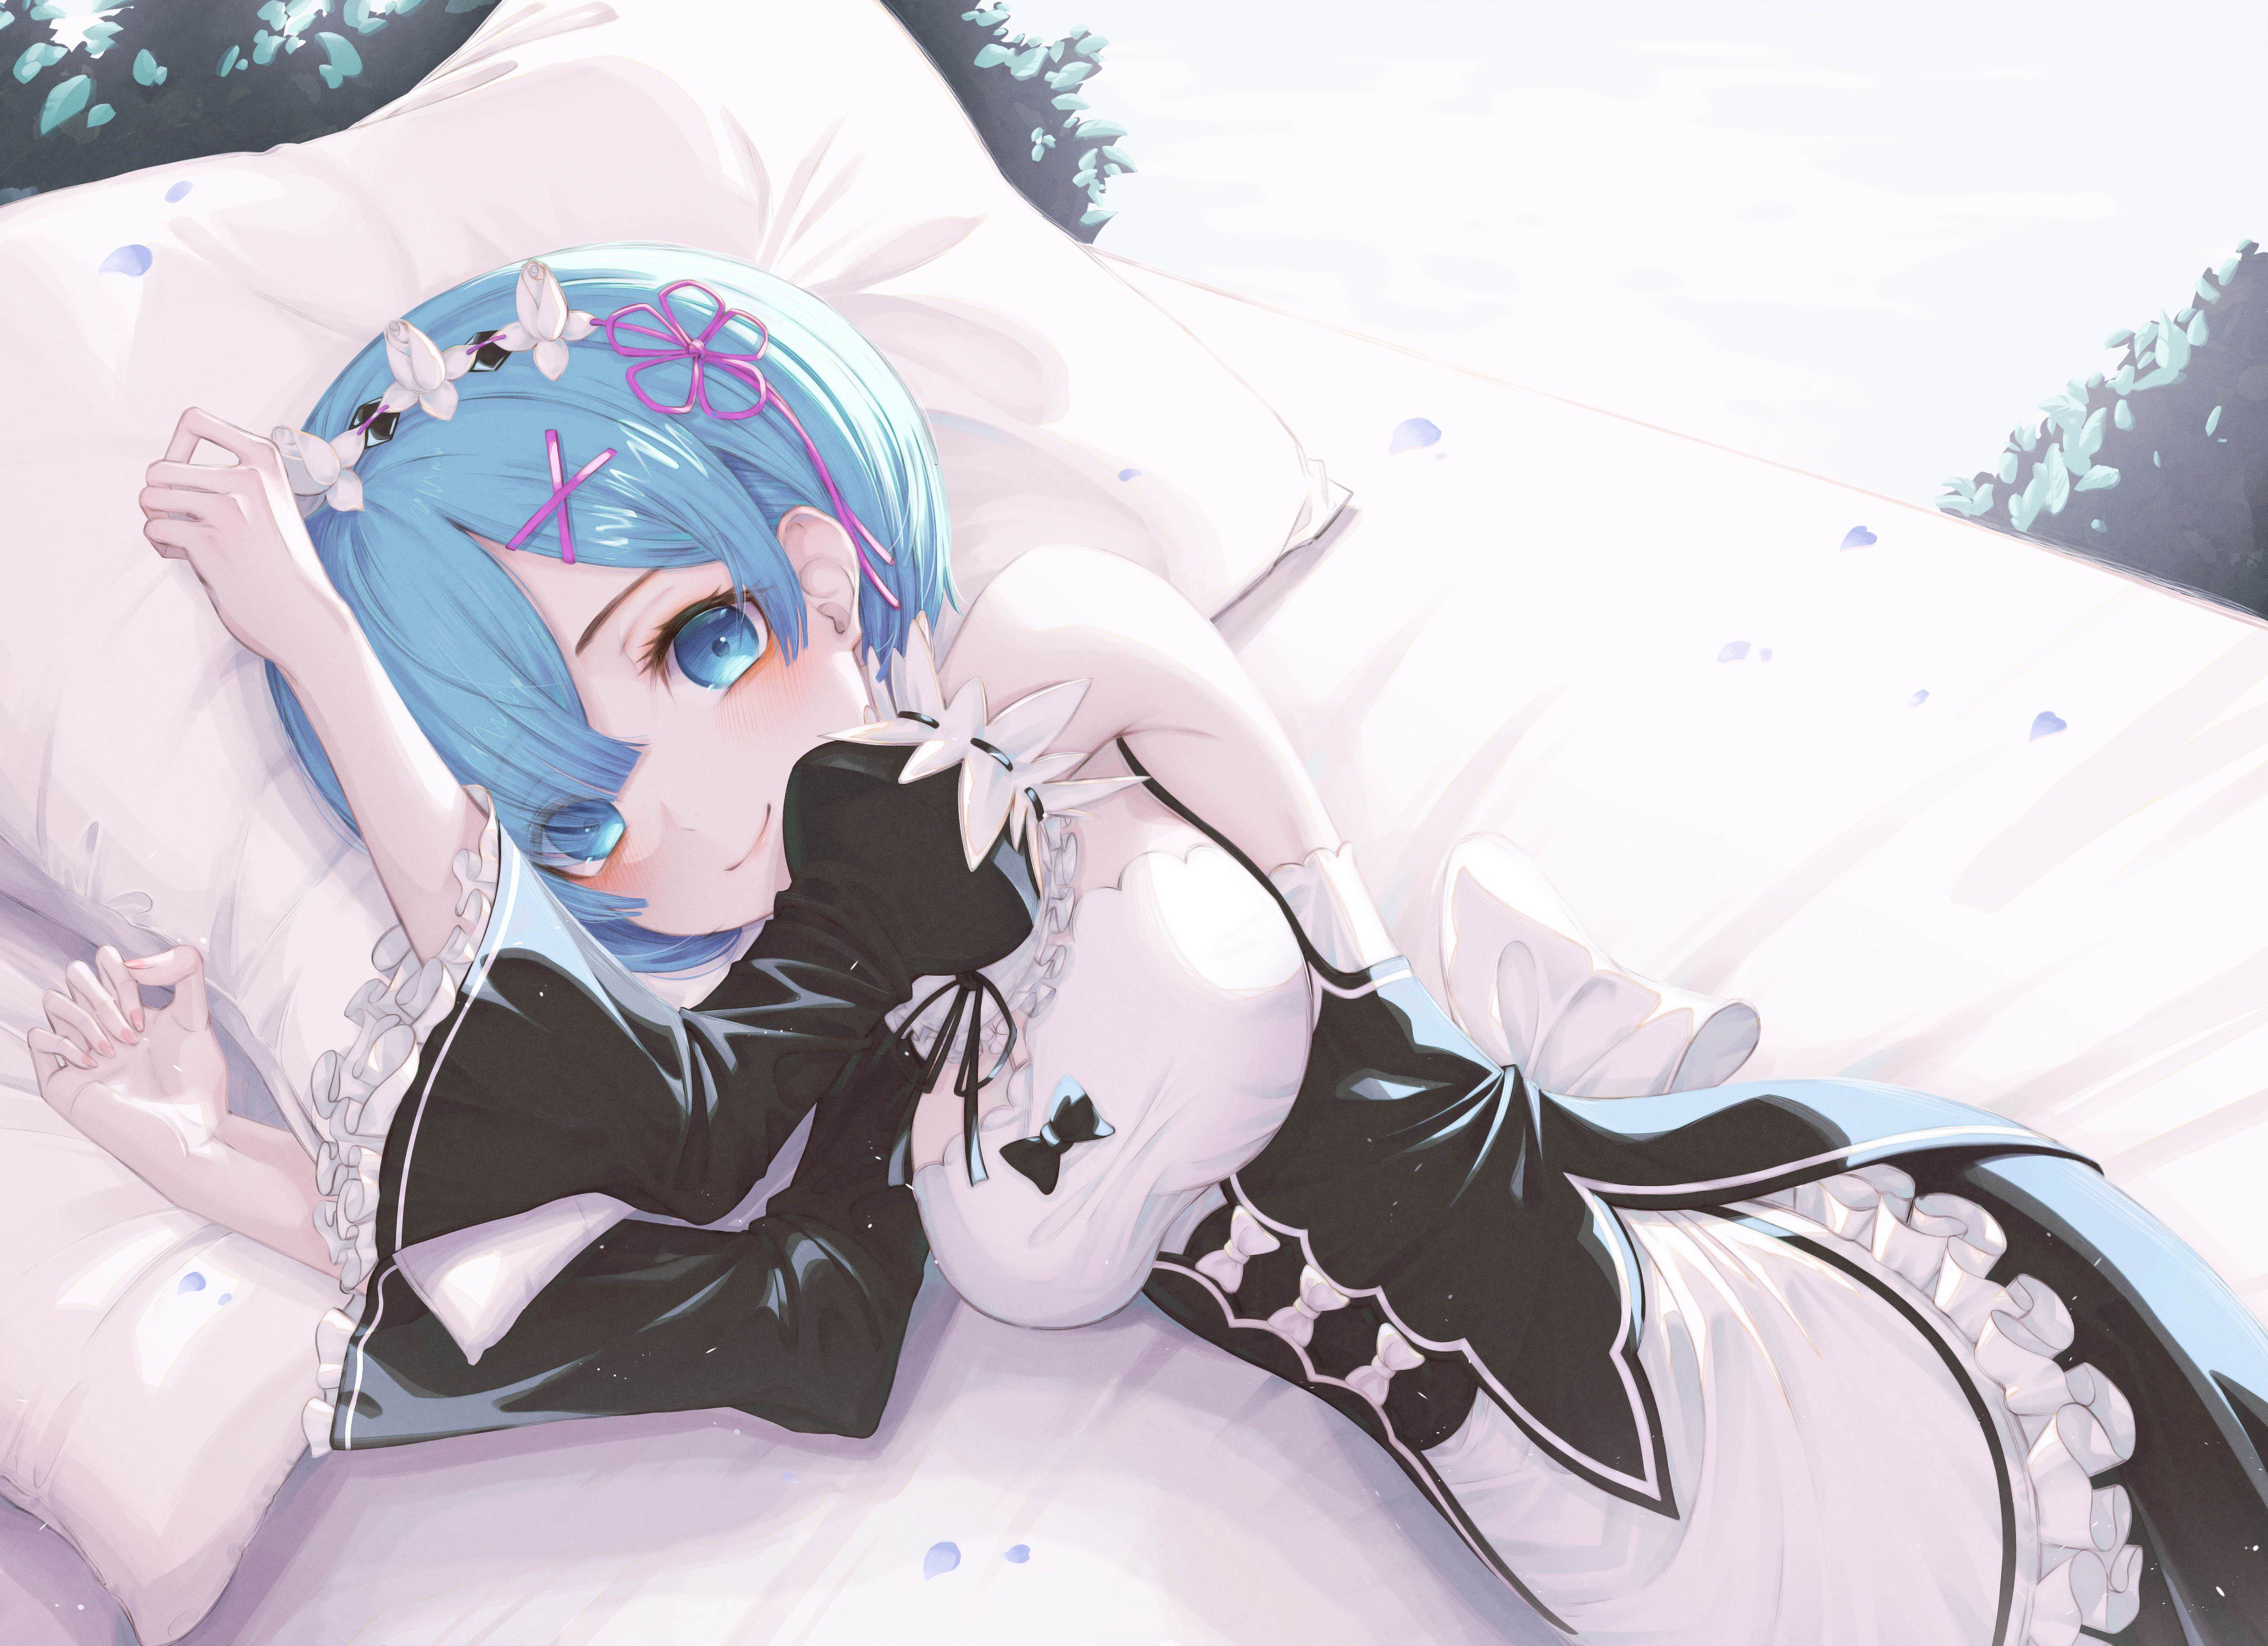 Anime Re:ZERO -Starting Life in Another World- 4k Ultra HD Wallpaper by ¥uka